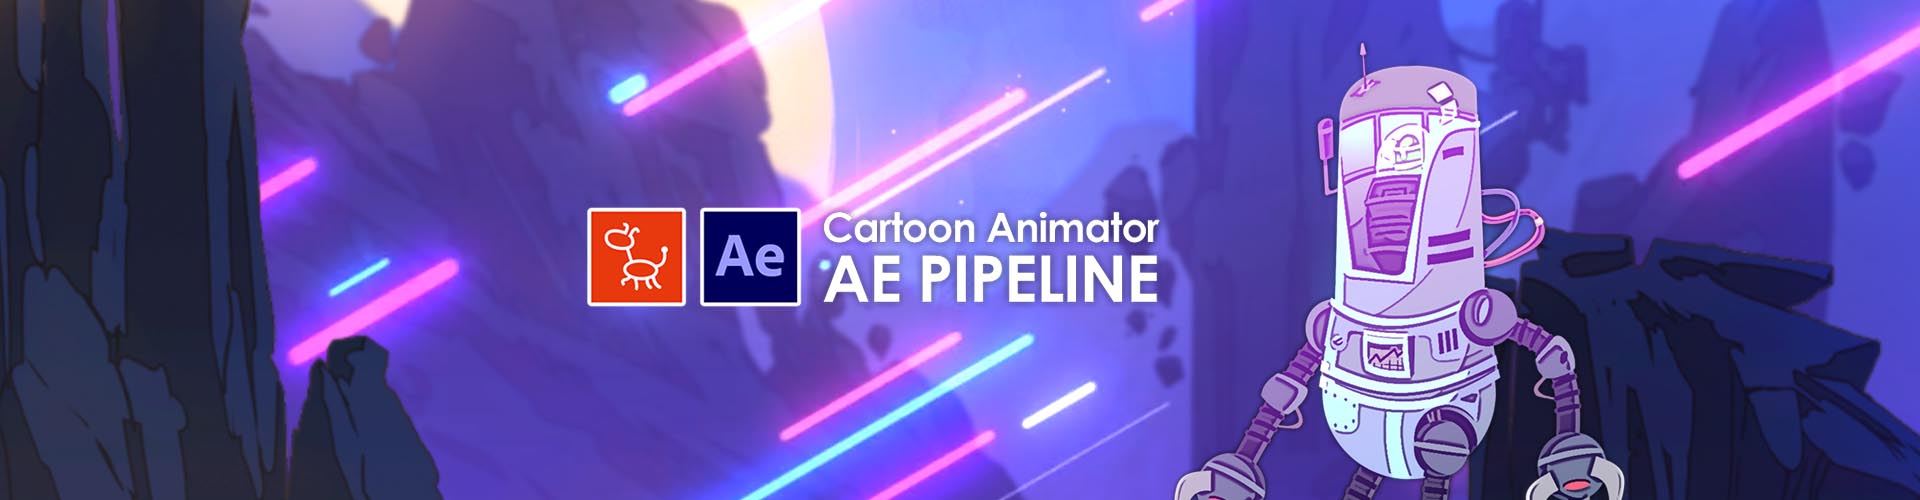 Cartoon Animator - the 2D animation software for rea-time production